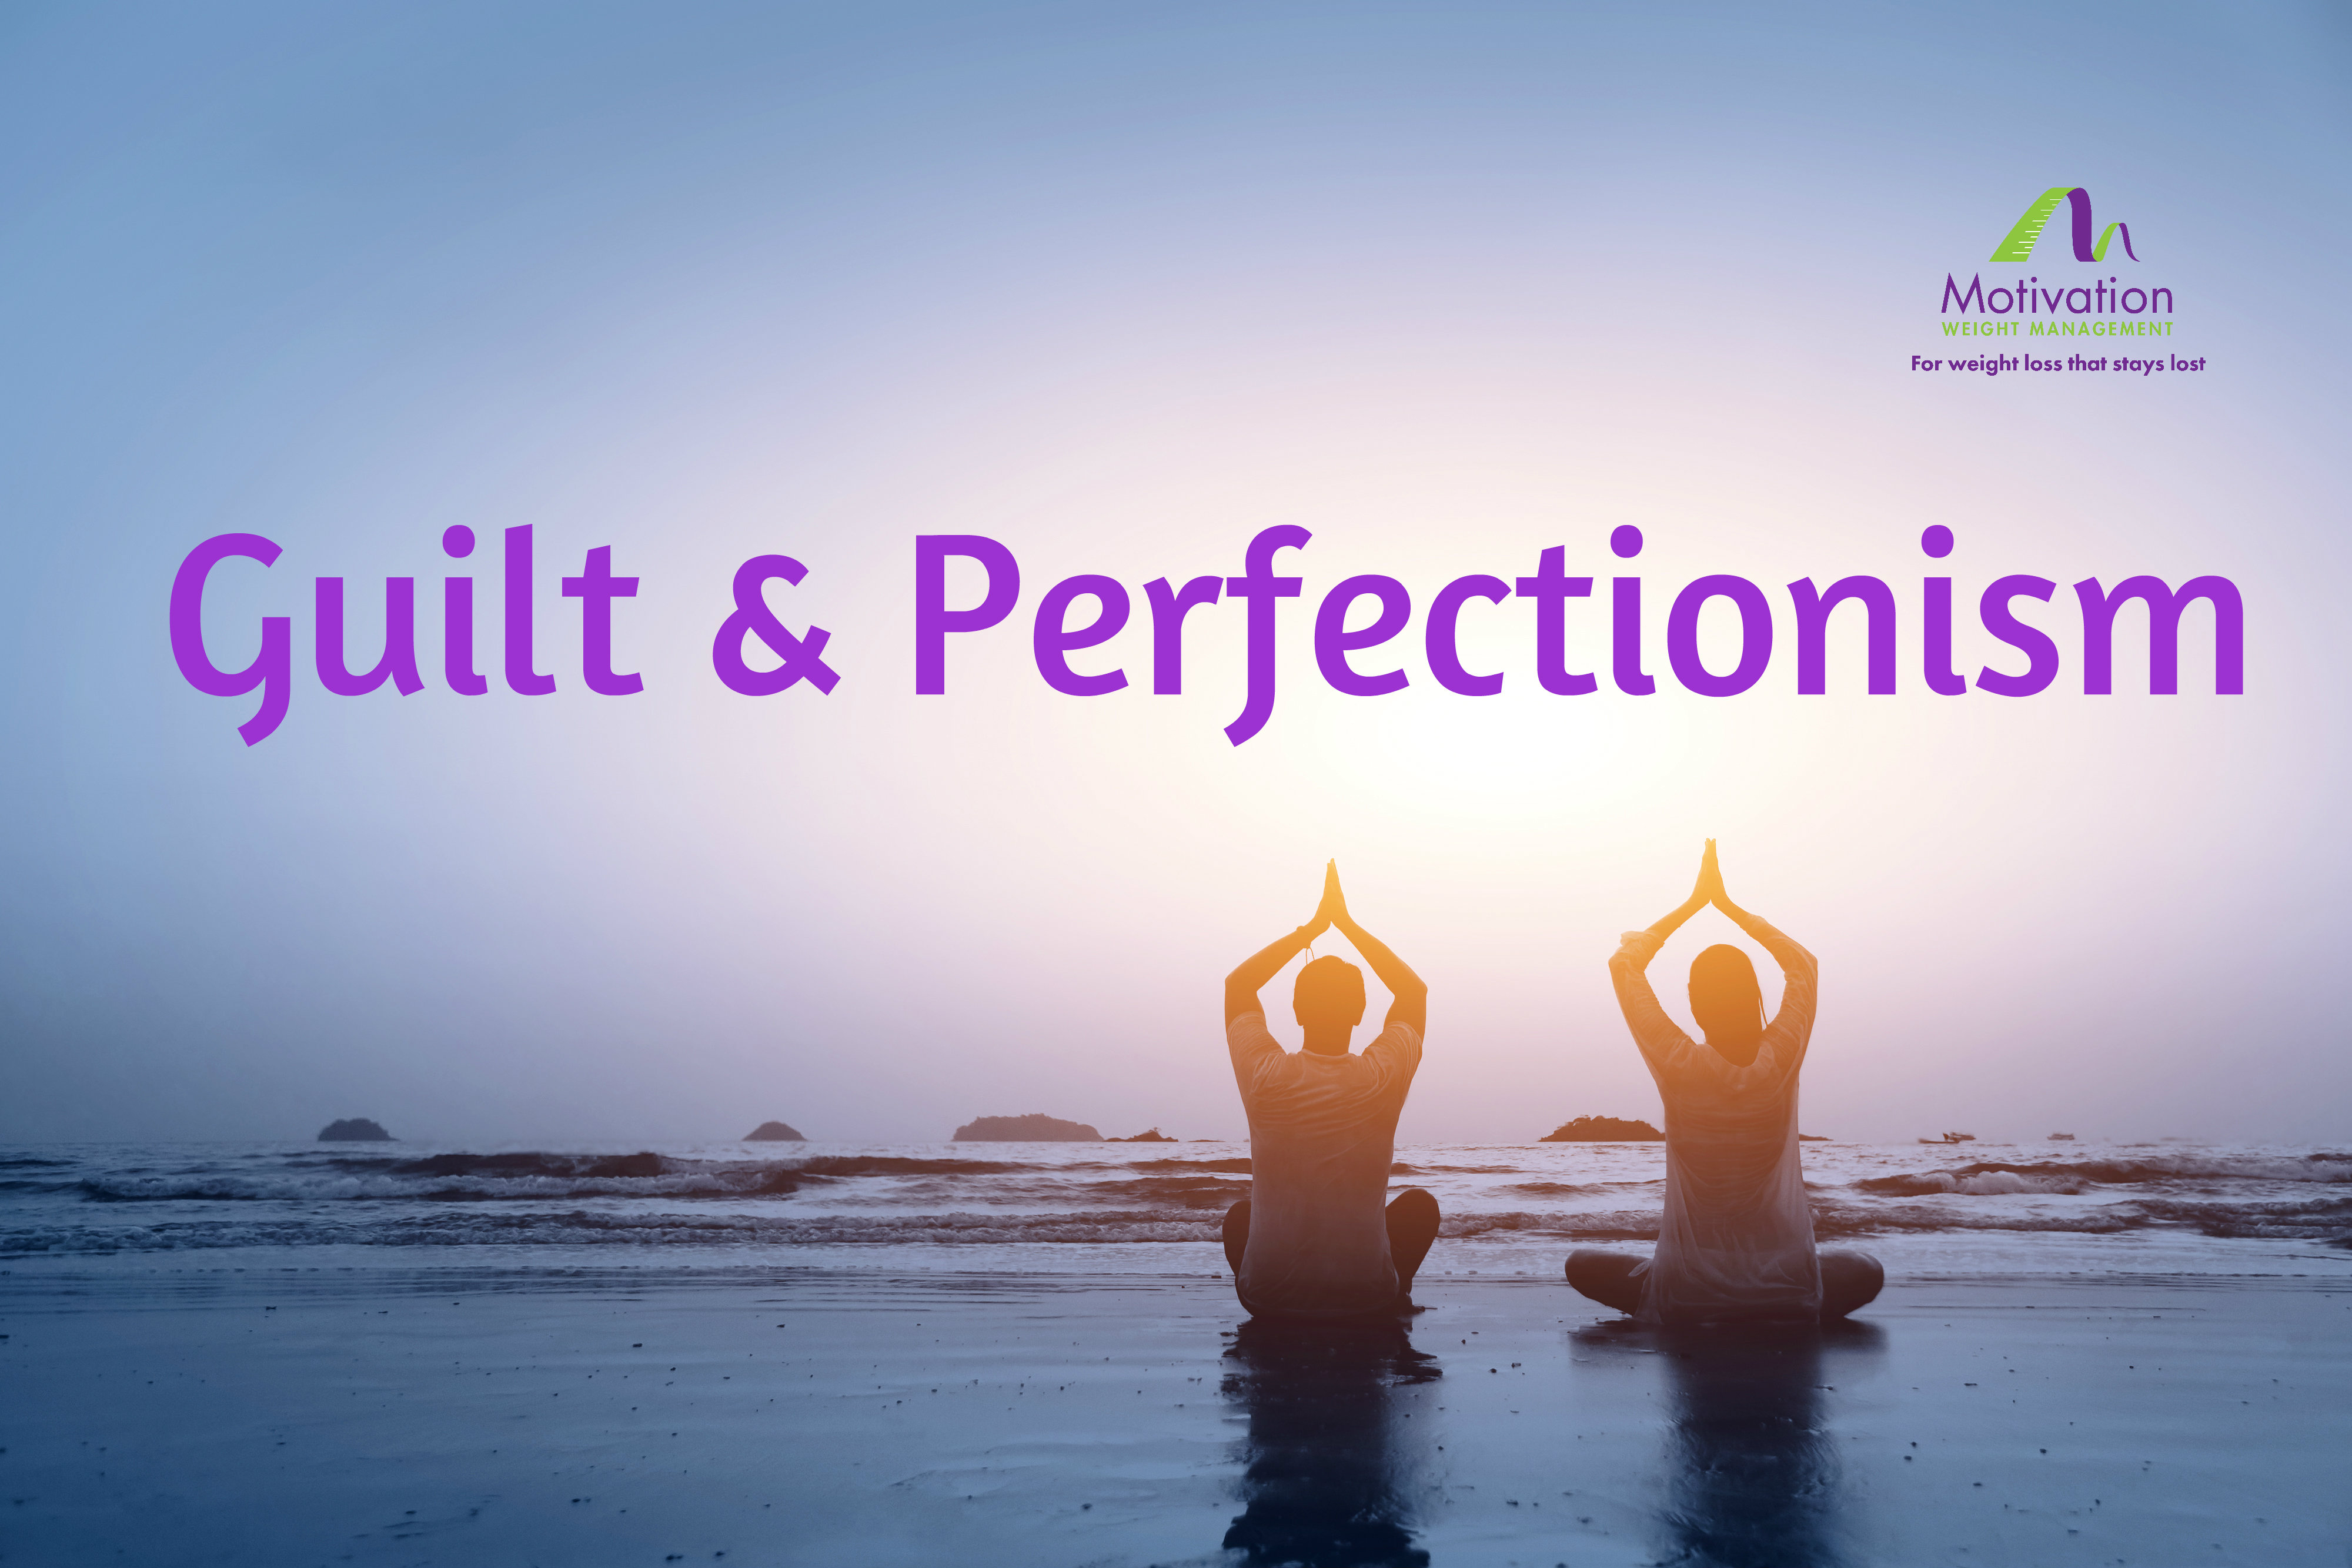 Day 11 Guilt & Perfectionism